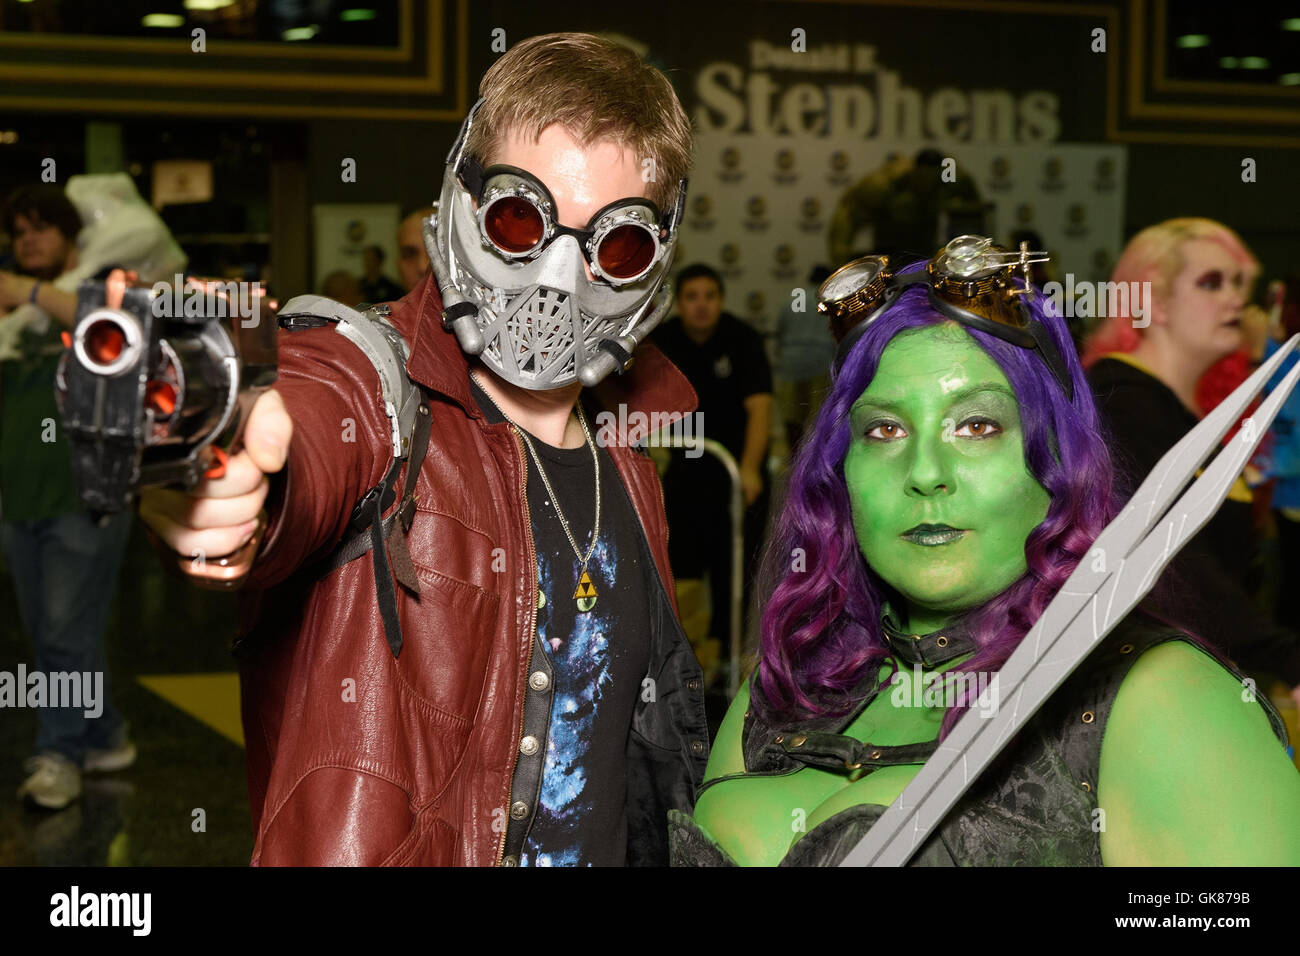 Chicago, Illinois, USA. 18th August 2016. Cosplayers dressed as characters from the 'Guardians of the Galaxy' film attend the Wizard World Chicago Comic Con at Donald E. Stephens Convention Center in Rosemont, IL. Credit:  Daniel Boczarski/Alamy Live News Stock Photo